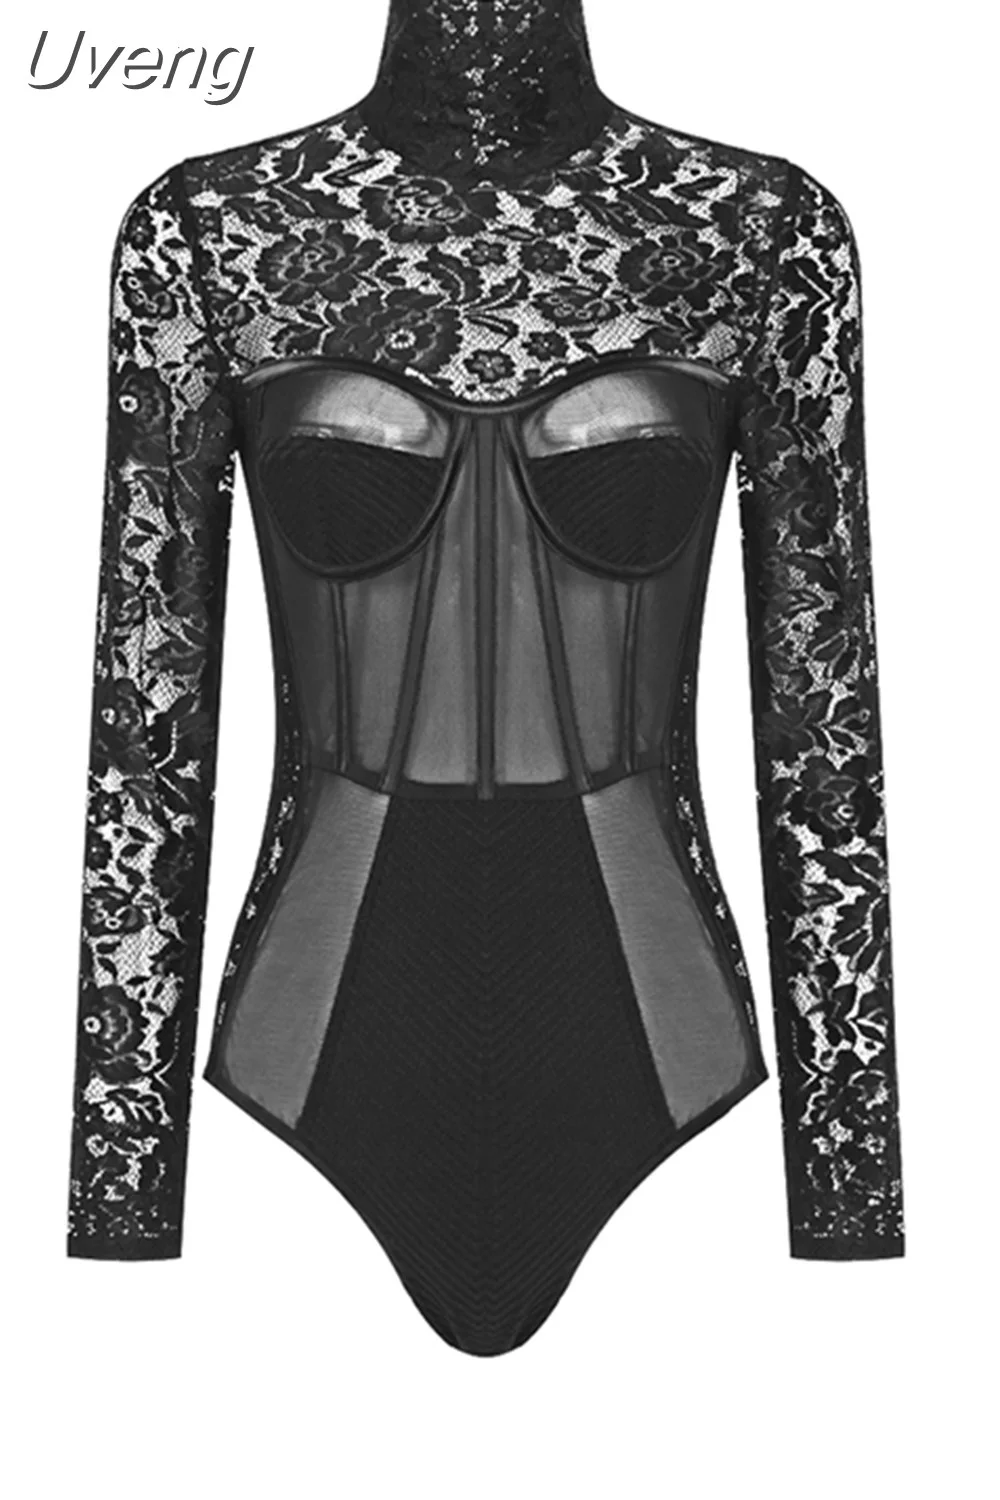 Uveng Mesh Splicing Lace BodySuit Women 2023 New Trendy Long Sleeve Bodies One Piece Bodycon Dress Sexy Female Clothing